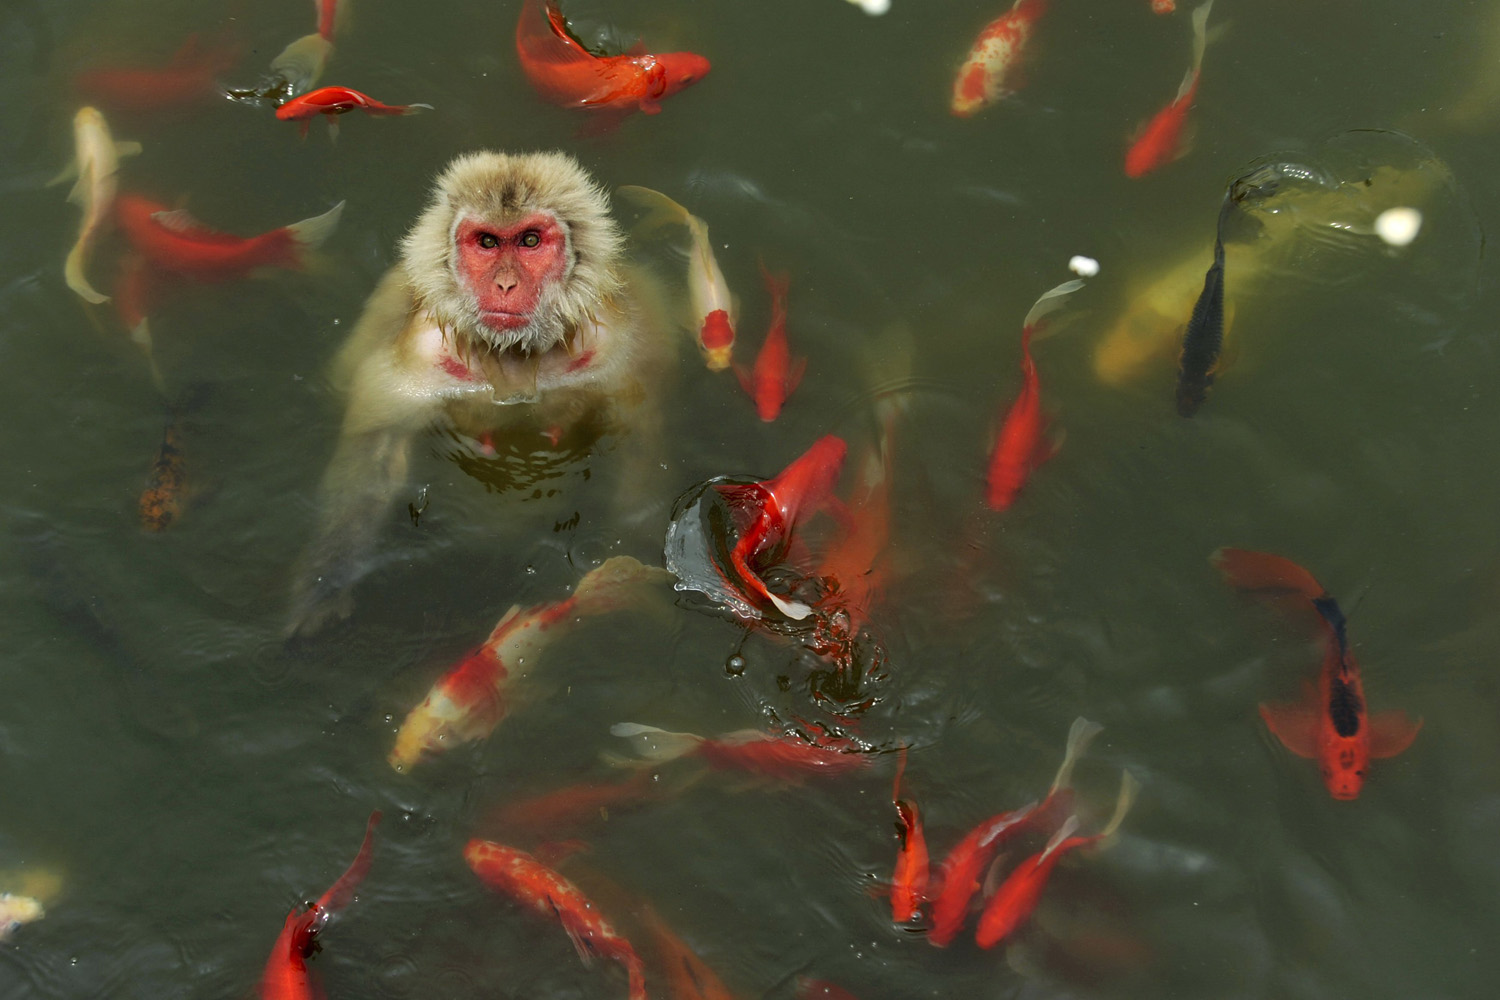 A monkey plays in a pond surrounded by carps at a wildlife park in Hefei, Anhui province